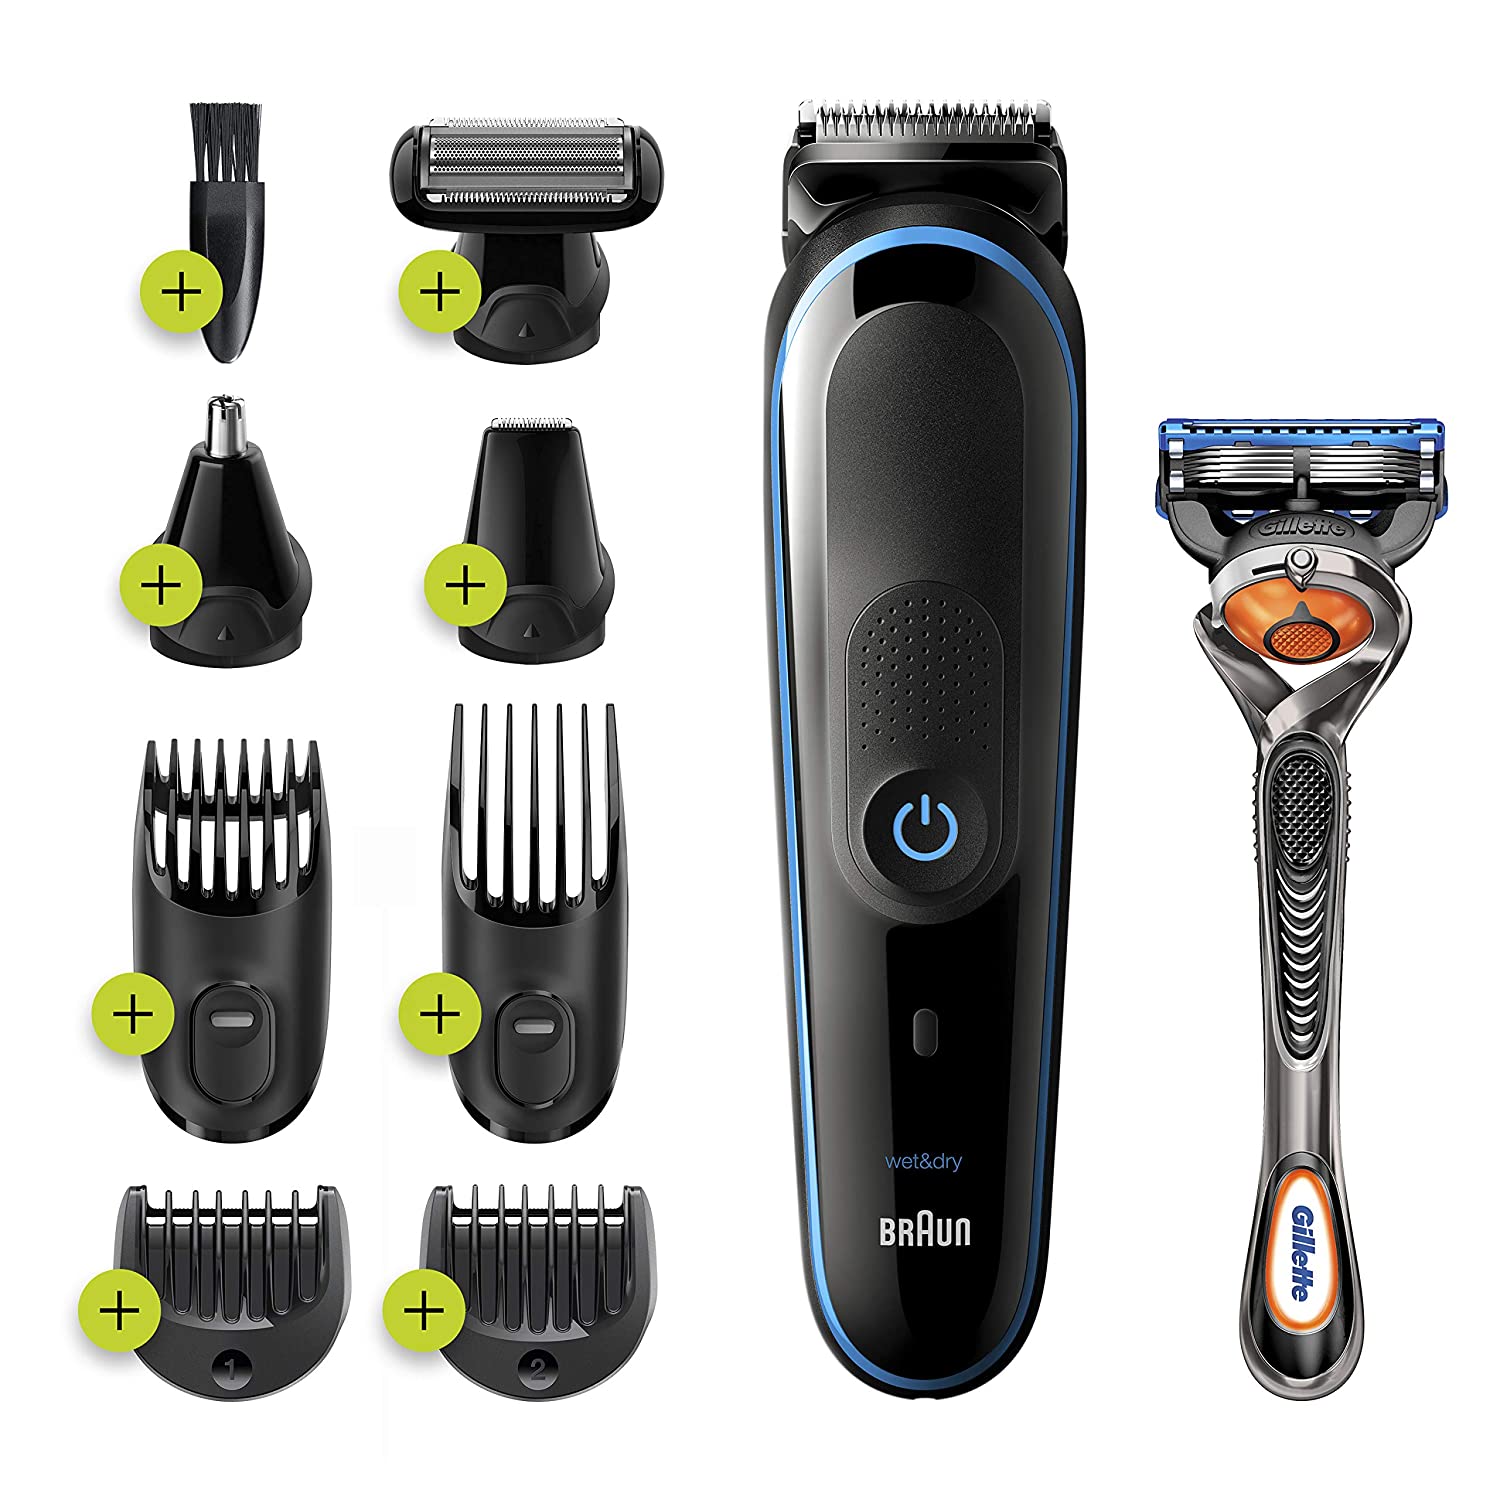 Braun All-in-one trimmer 5 for Face, Hair, and Body, Black/Blue MGK5280